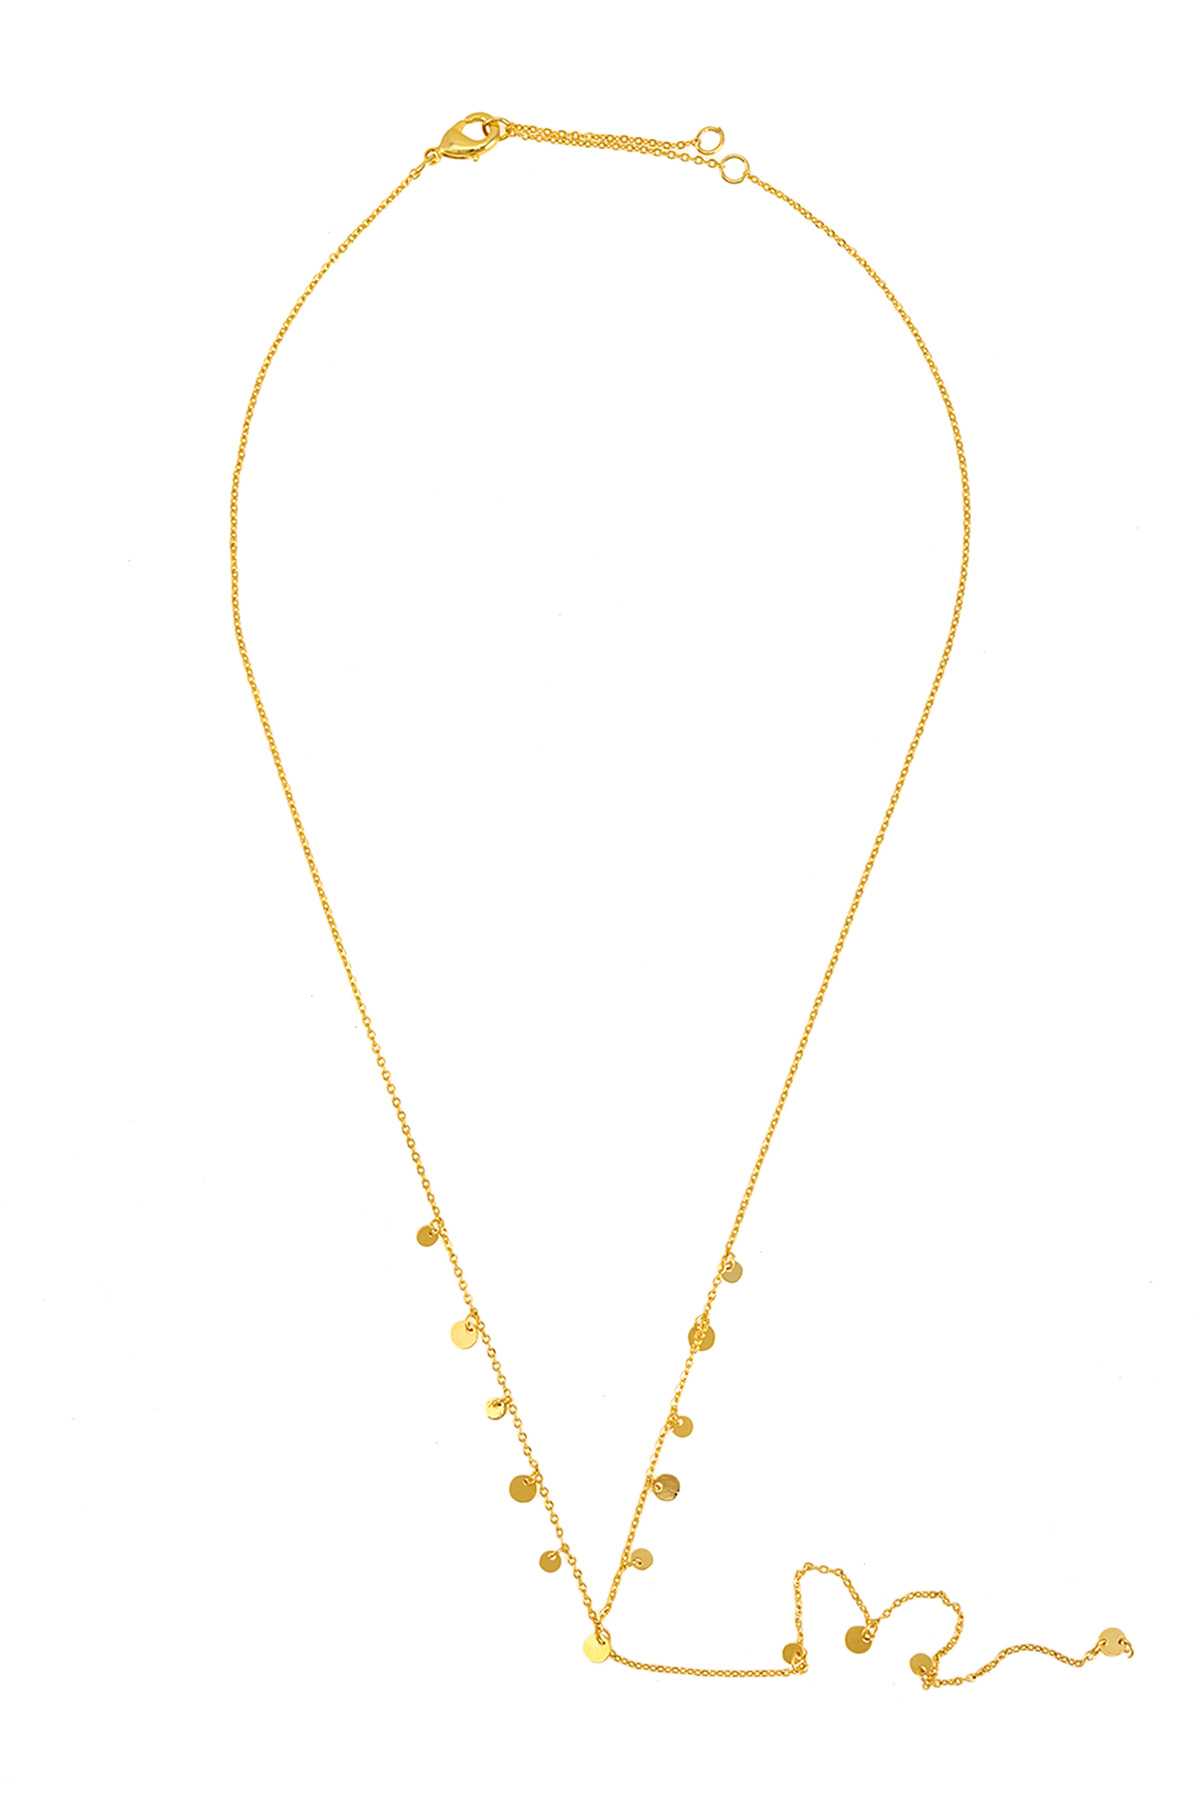 GOLD DIPPED SMALL CIRCLE CHARM LARIAT NECKLACE